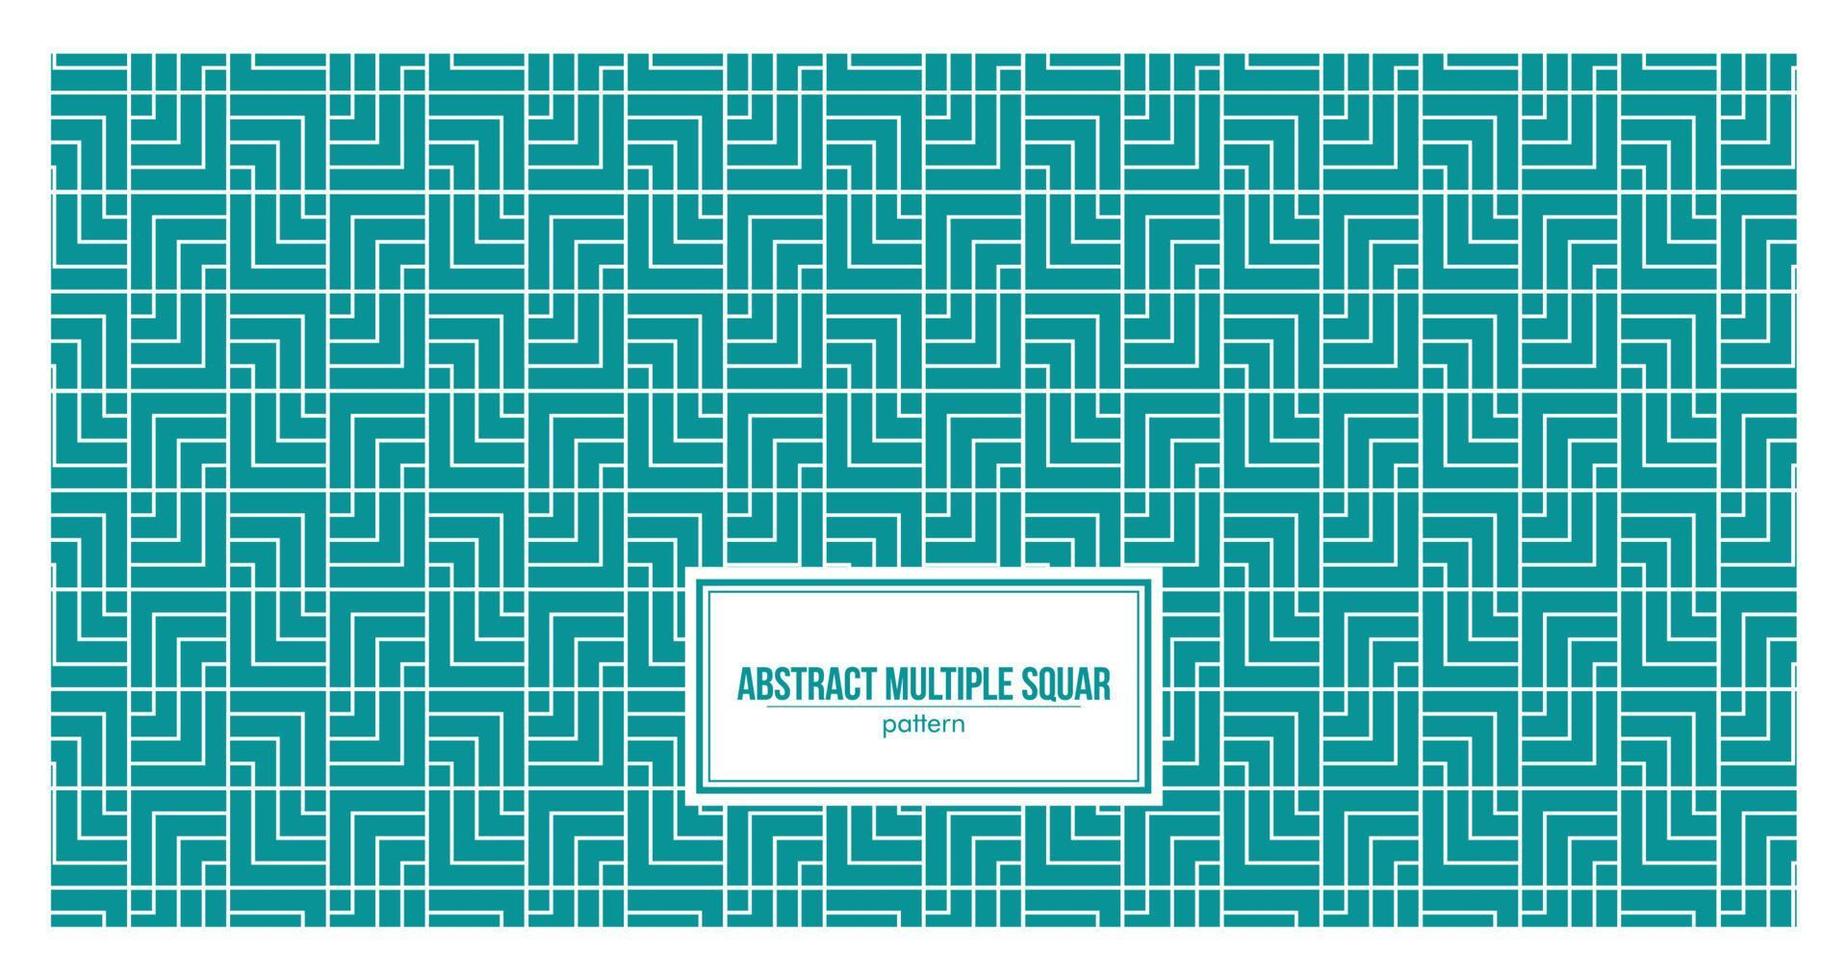 abstract multiple square pattern with turquoise background vector